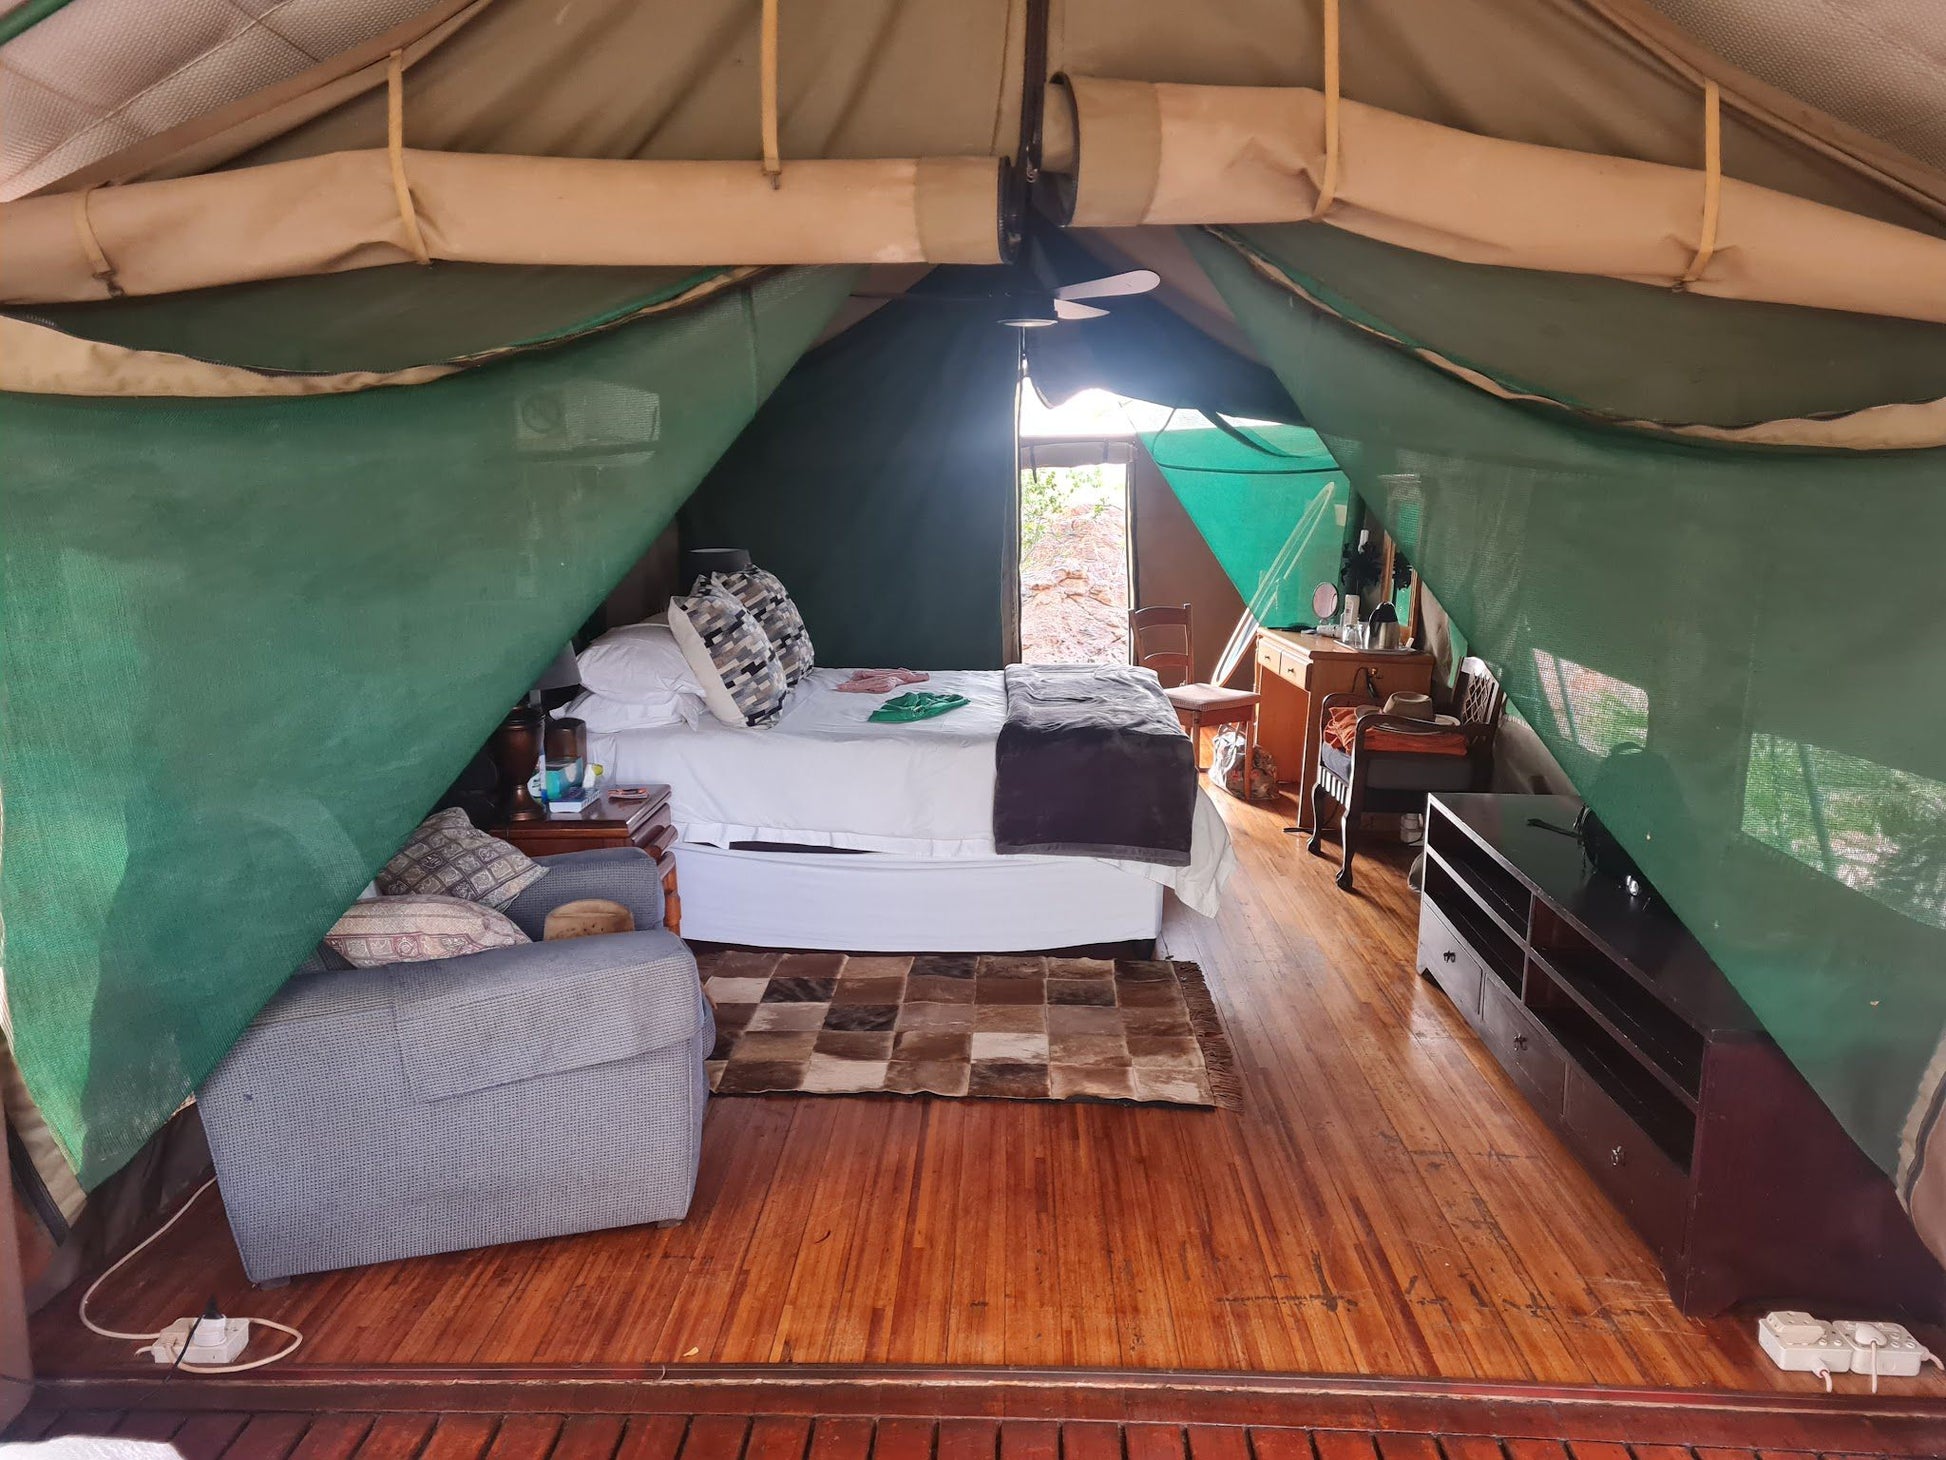 Halcyon Game Lodge Alldays Limpopo Province South Africa Tent, Architecture, Bedroom